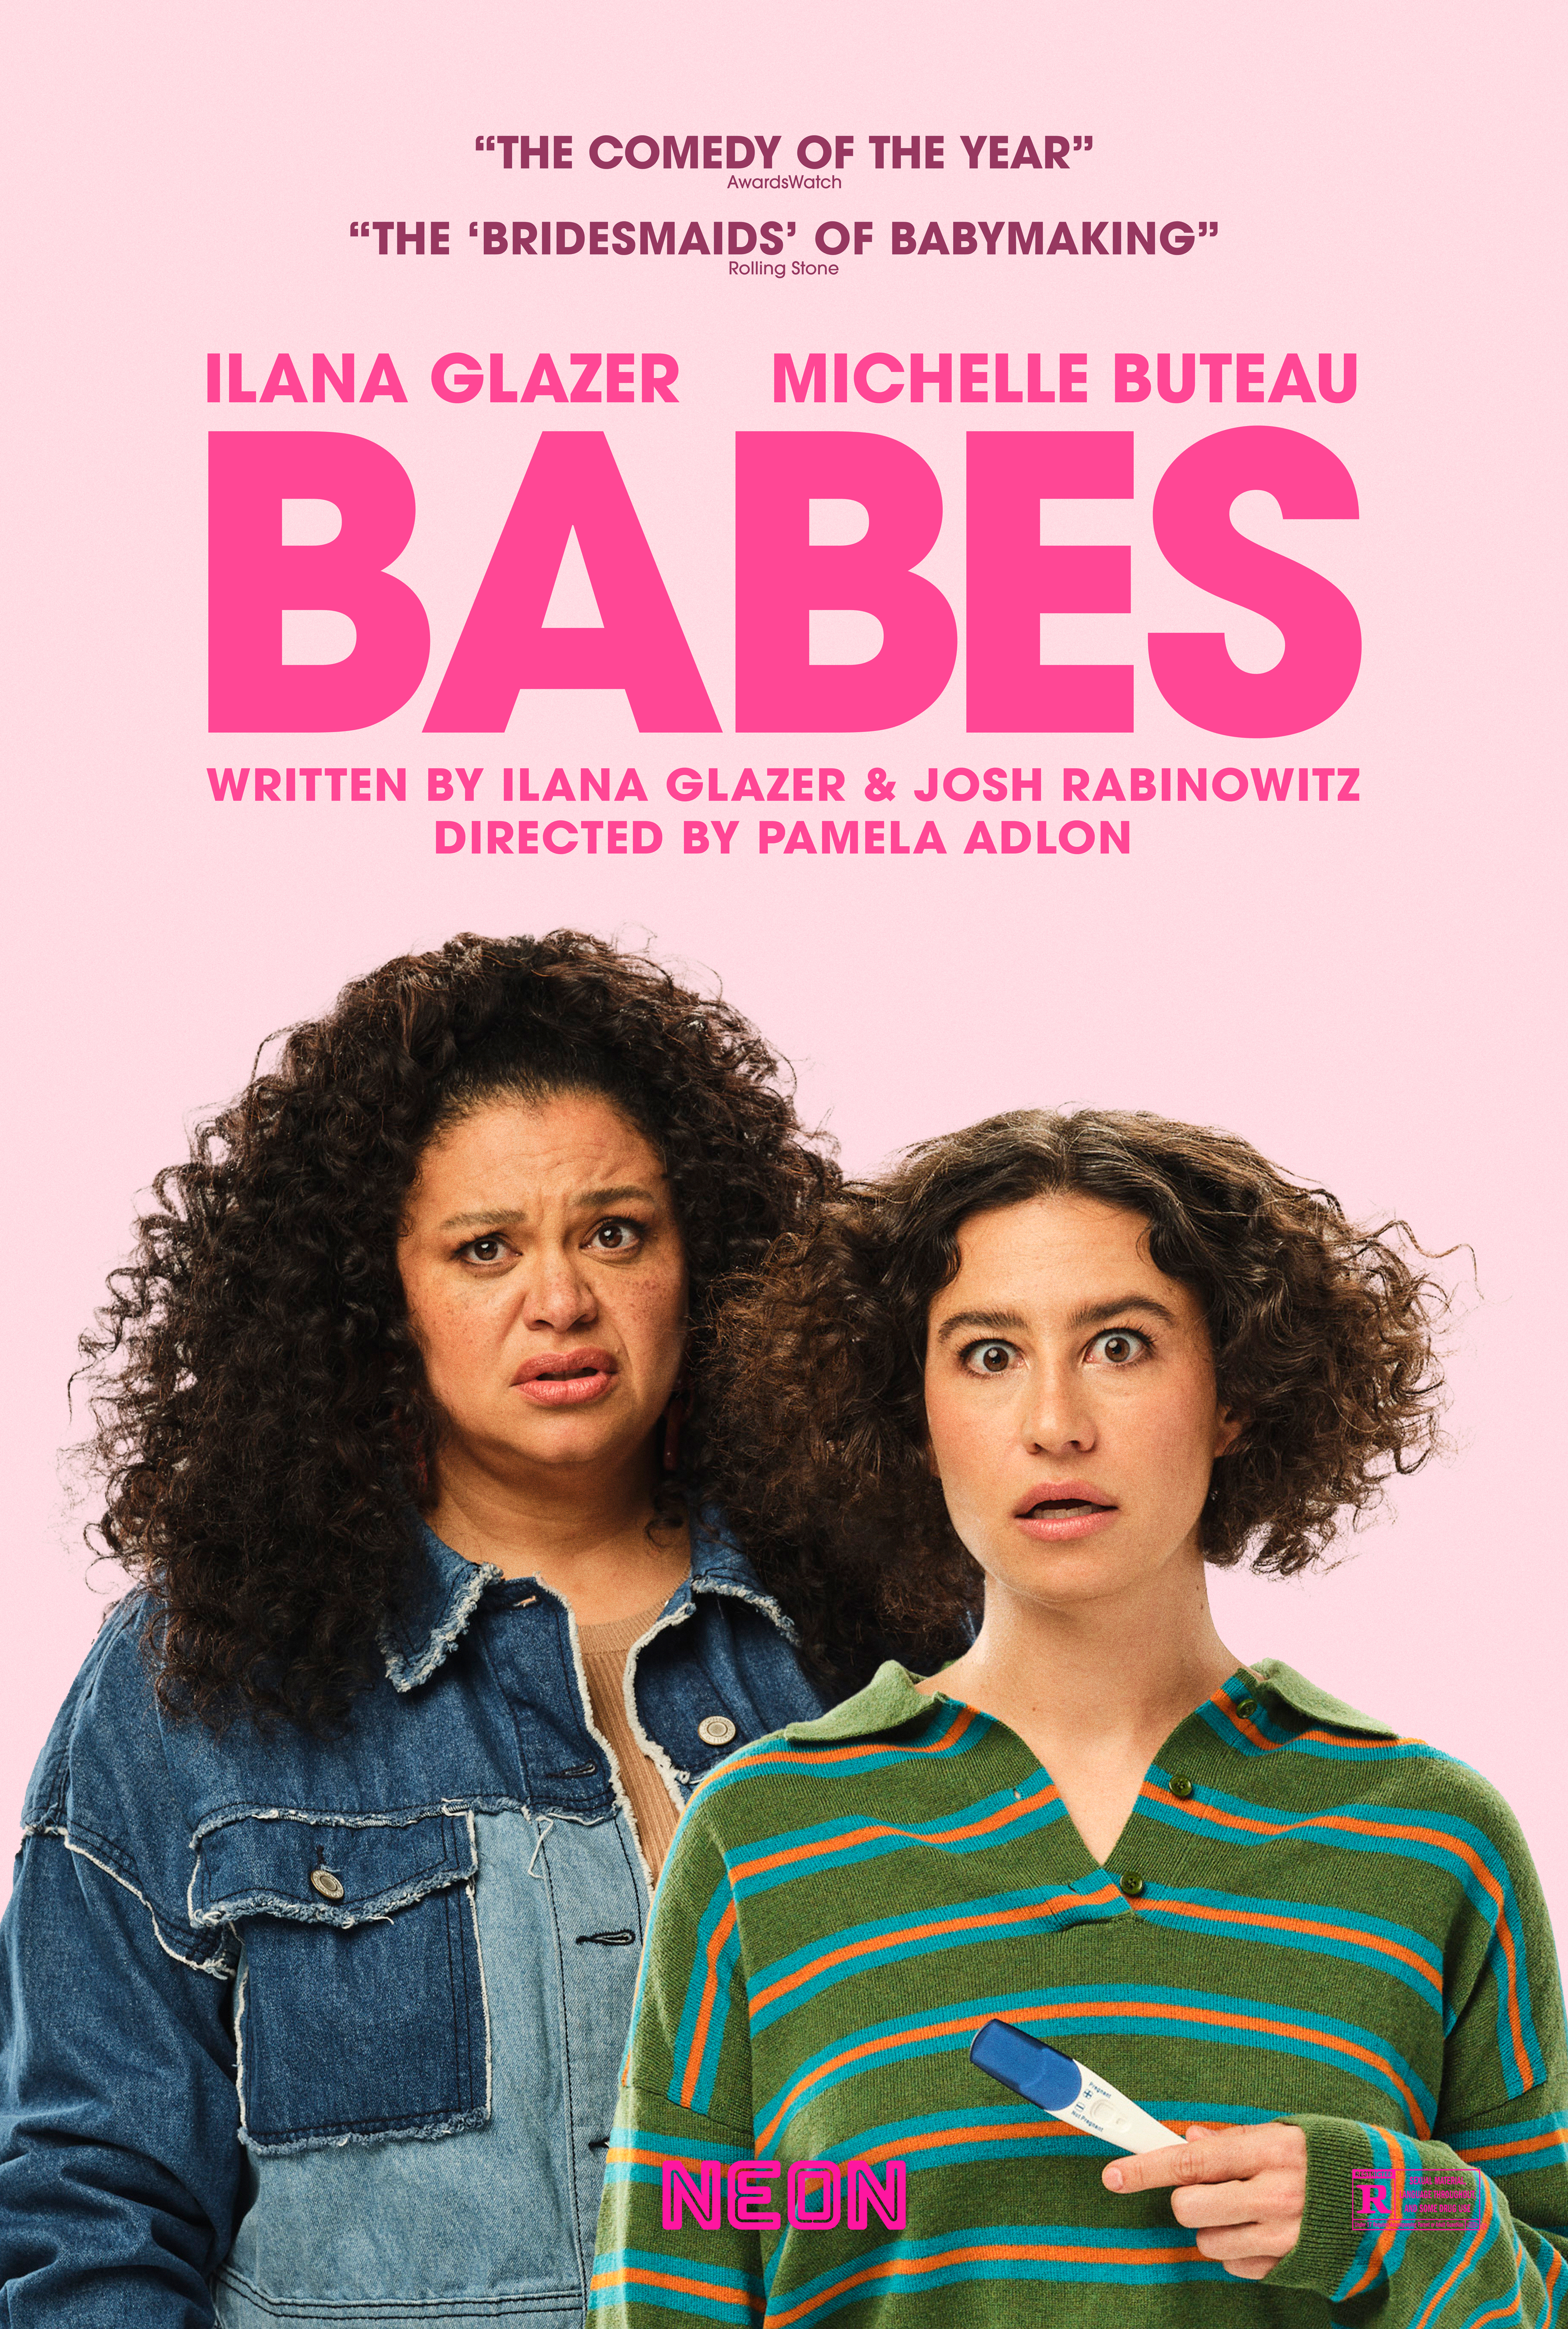 BABES Q&A with stars Ilana Glazer and Michelle Buteau